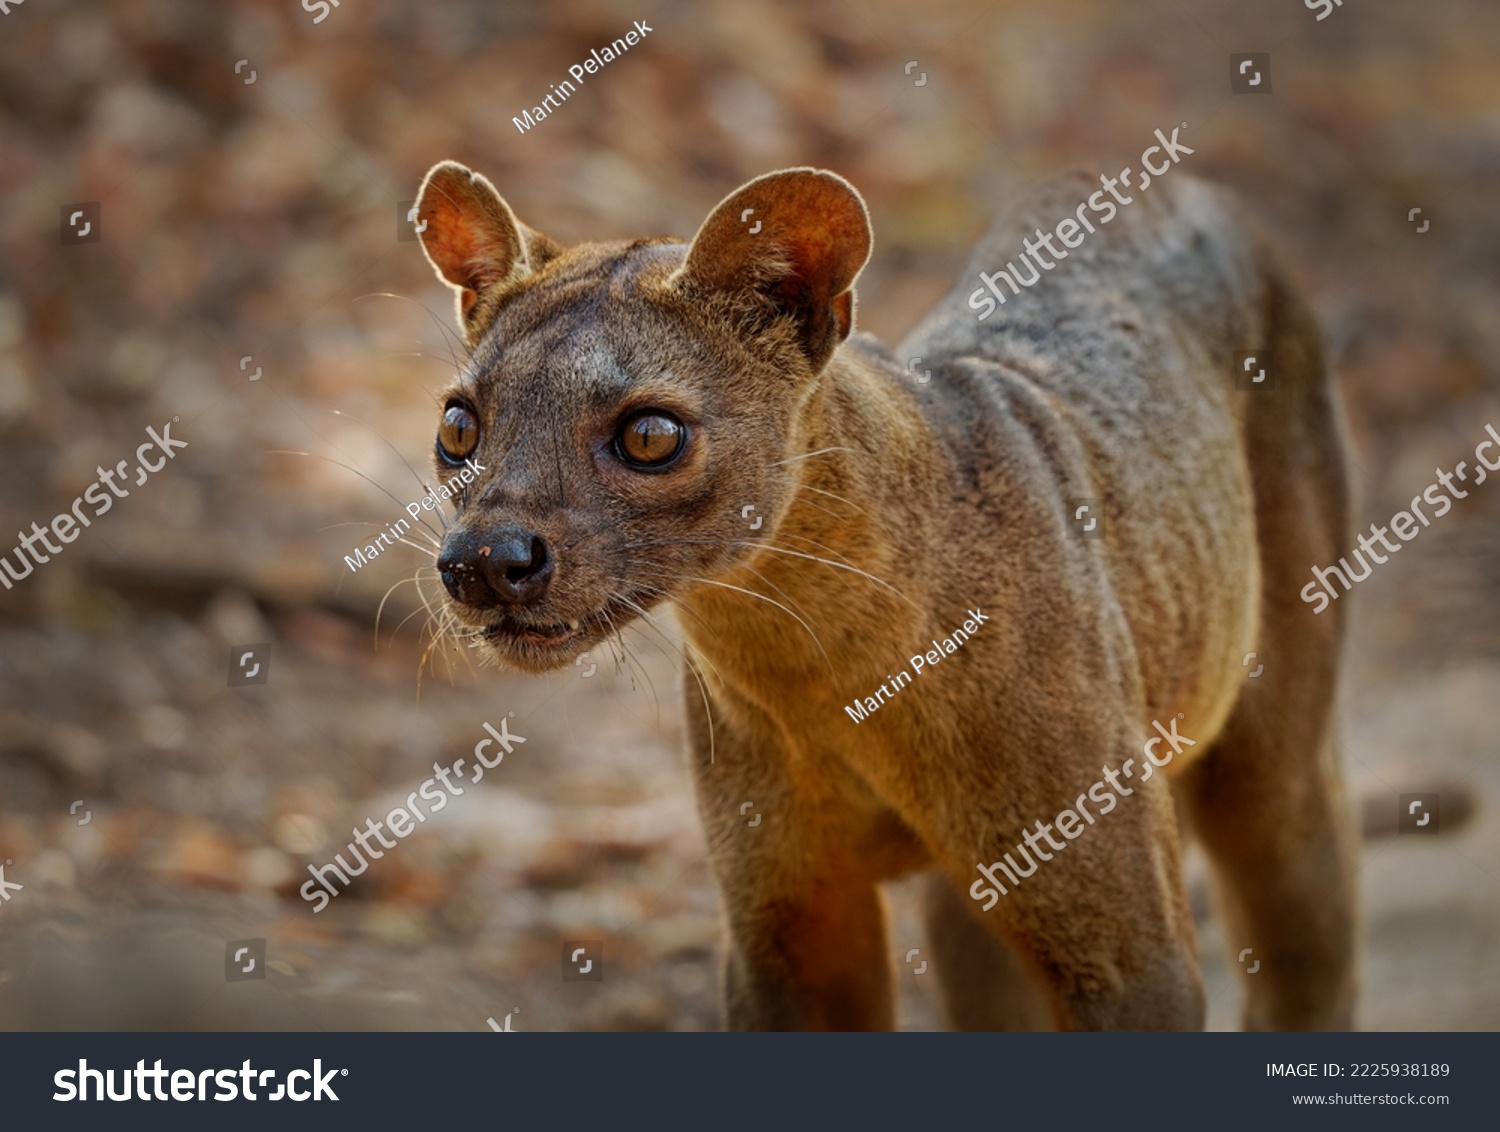 Fossa - Cryptoprocta ferox long-tailed mammal endemic to Madagascar, family Eupleridae, related to the Malagasy civet, the largest mammalian carnivore and top or apex predator on Madagascar. Portrait. #2225938189